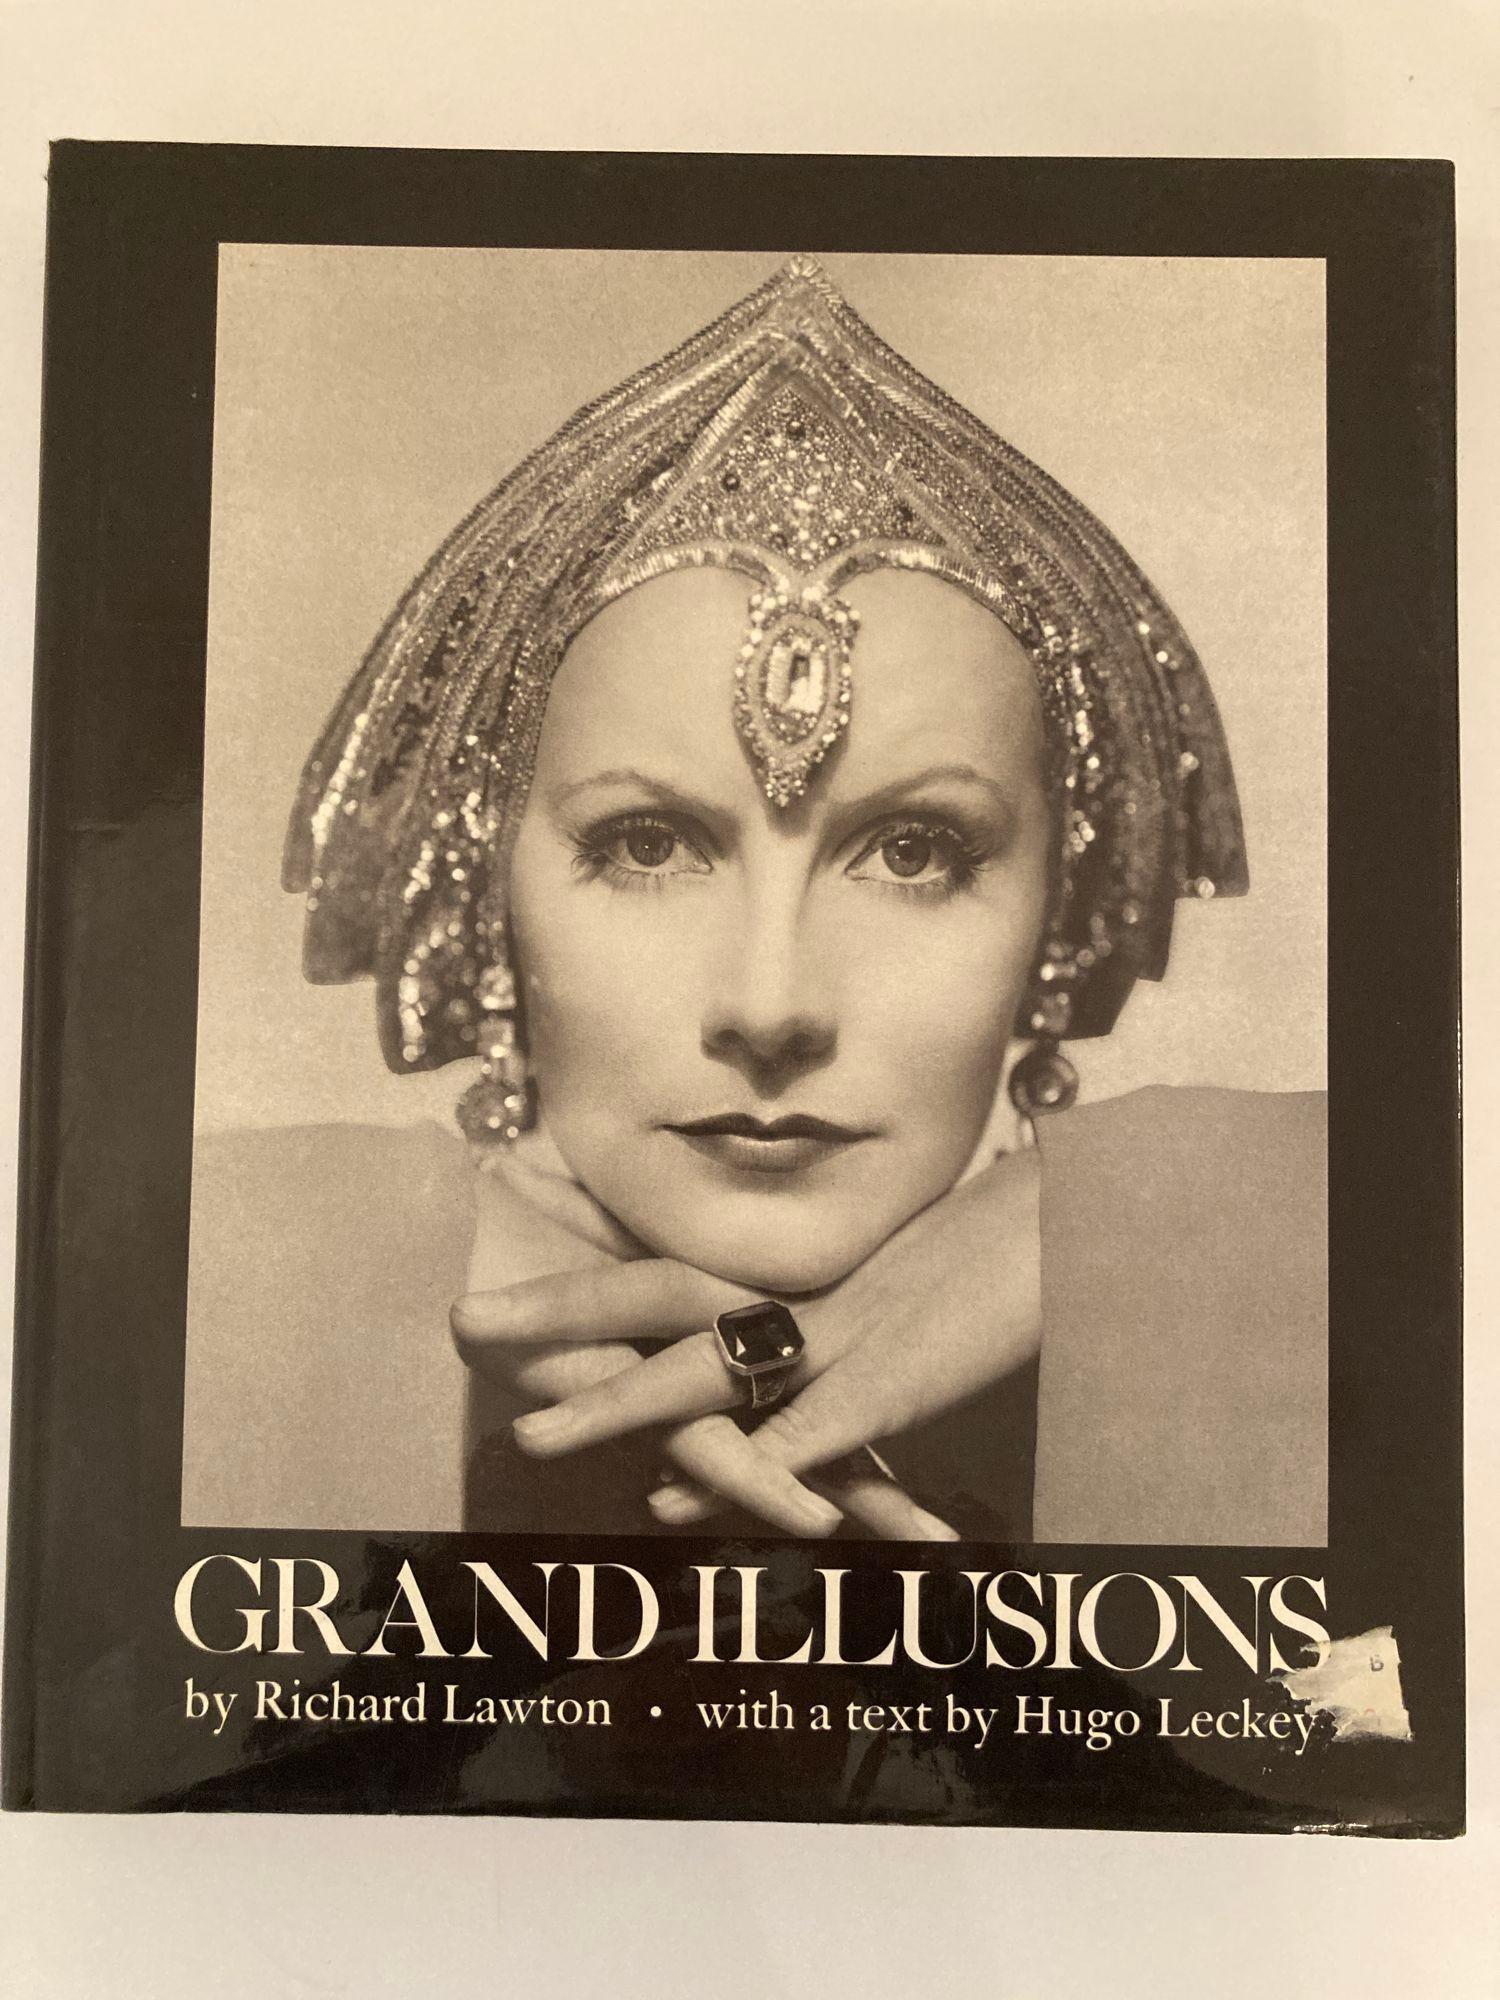 Grand illusions hardcover book by Richard Lawton and Hugo Leckey.
Black and white photographs of film actors and actresses.
This book is perfect for any fans of old Hollywood. It contains hundreds of classic pictures so clear and gorgeous.
Your